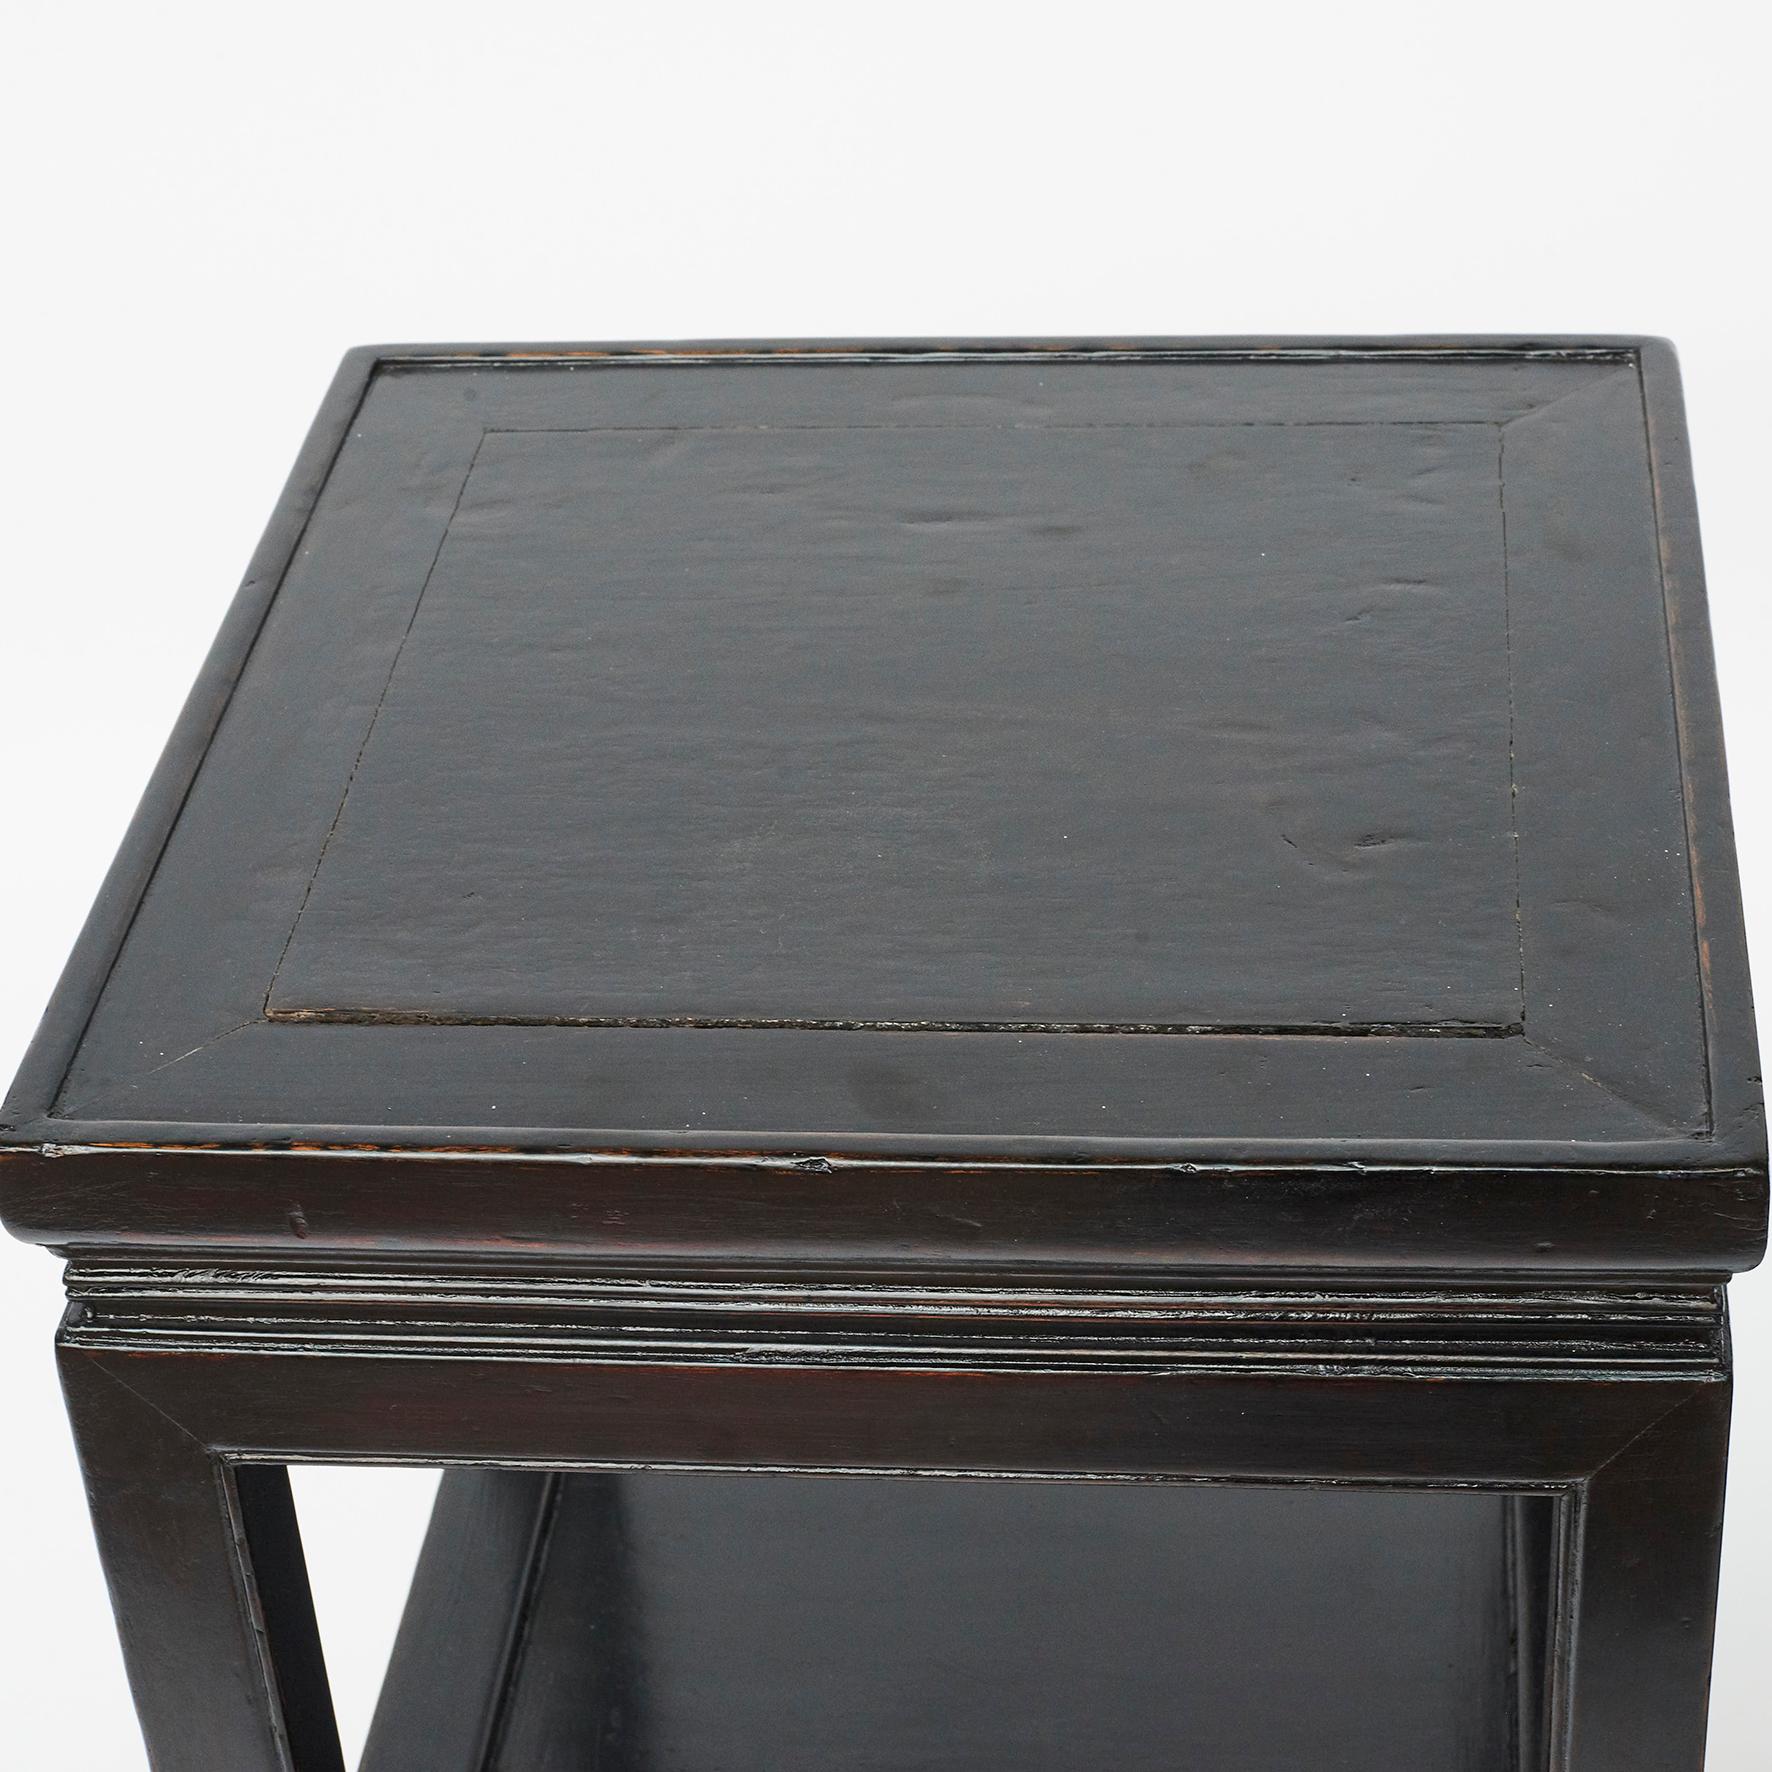 Wood Pair of Square Black Lacquer End or Side Tables with Shelves, Beijing, 1910-1920